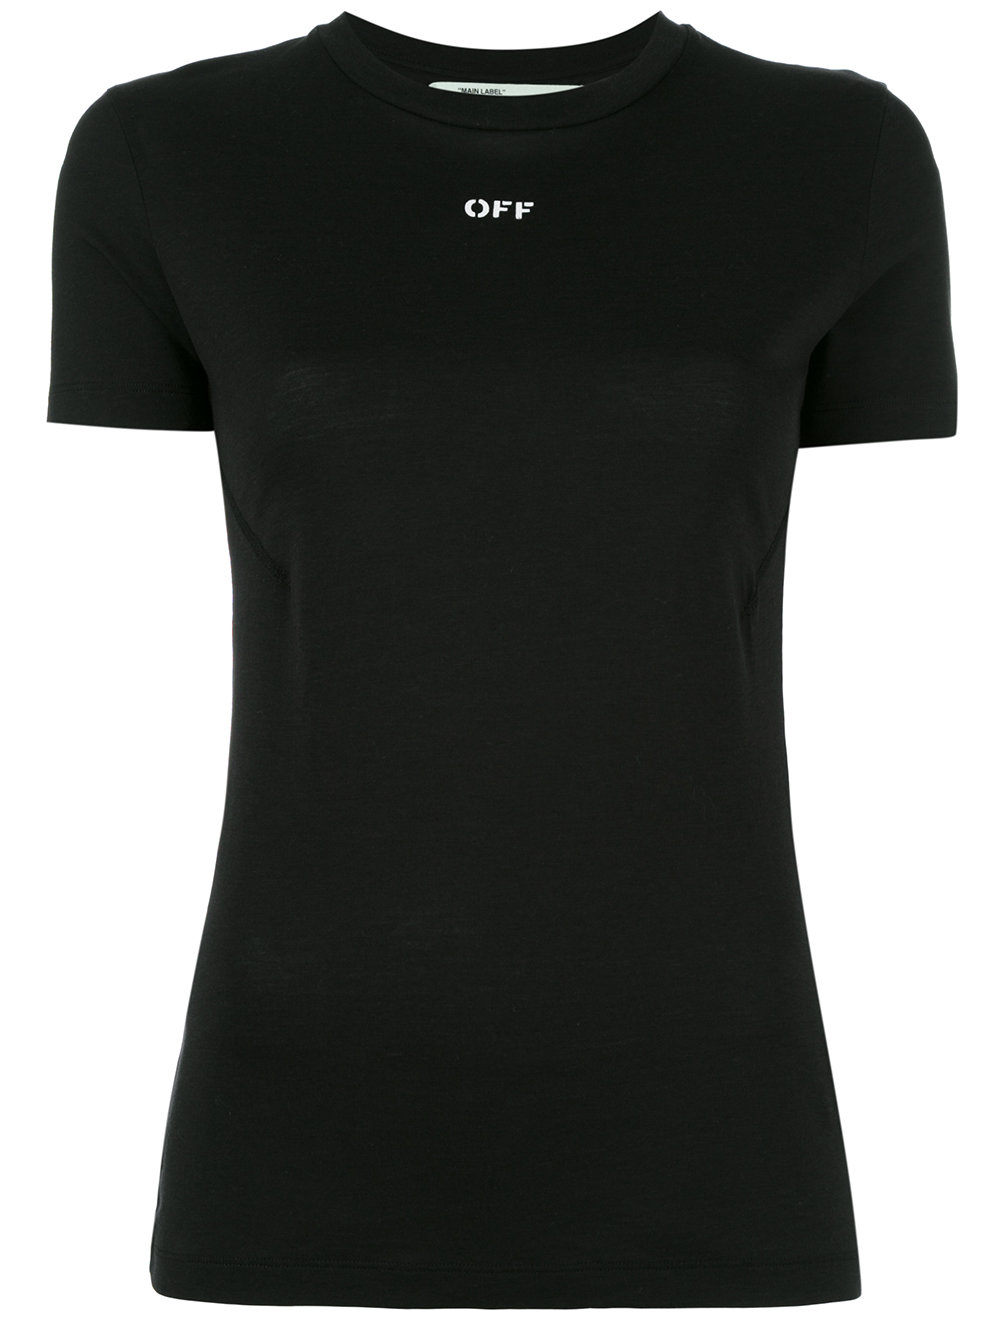 Off-White OFF T-shirt Free and Fast Shipping 1001 BLACK Women Clothing T-shirts & Jerseys